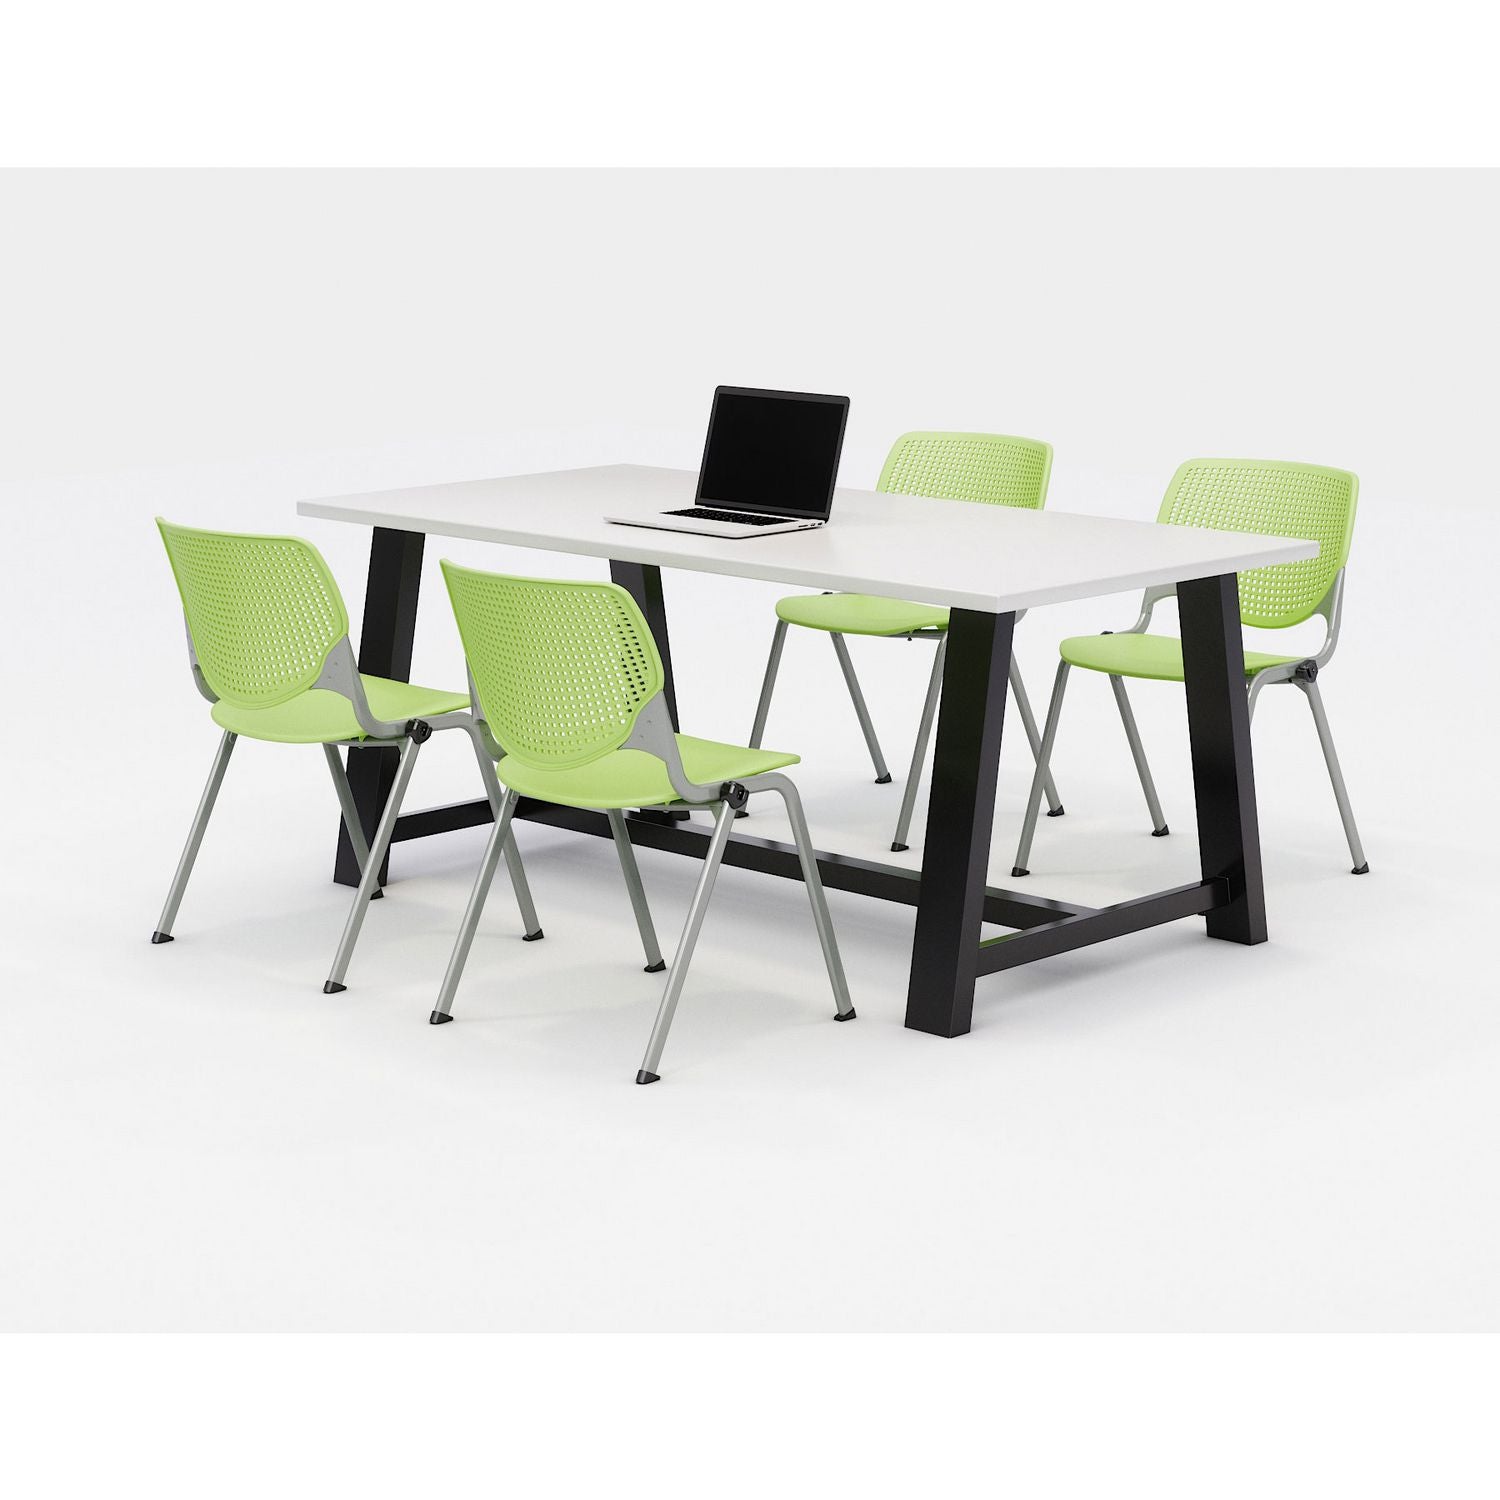 midtown-dining-table-with-four-lime-green-kool-series-chairs-36-x-72-x-30-designer-white-ships-in-4-6-business-days_kfi840031900302 - 1